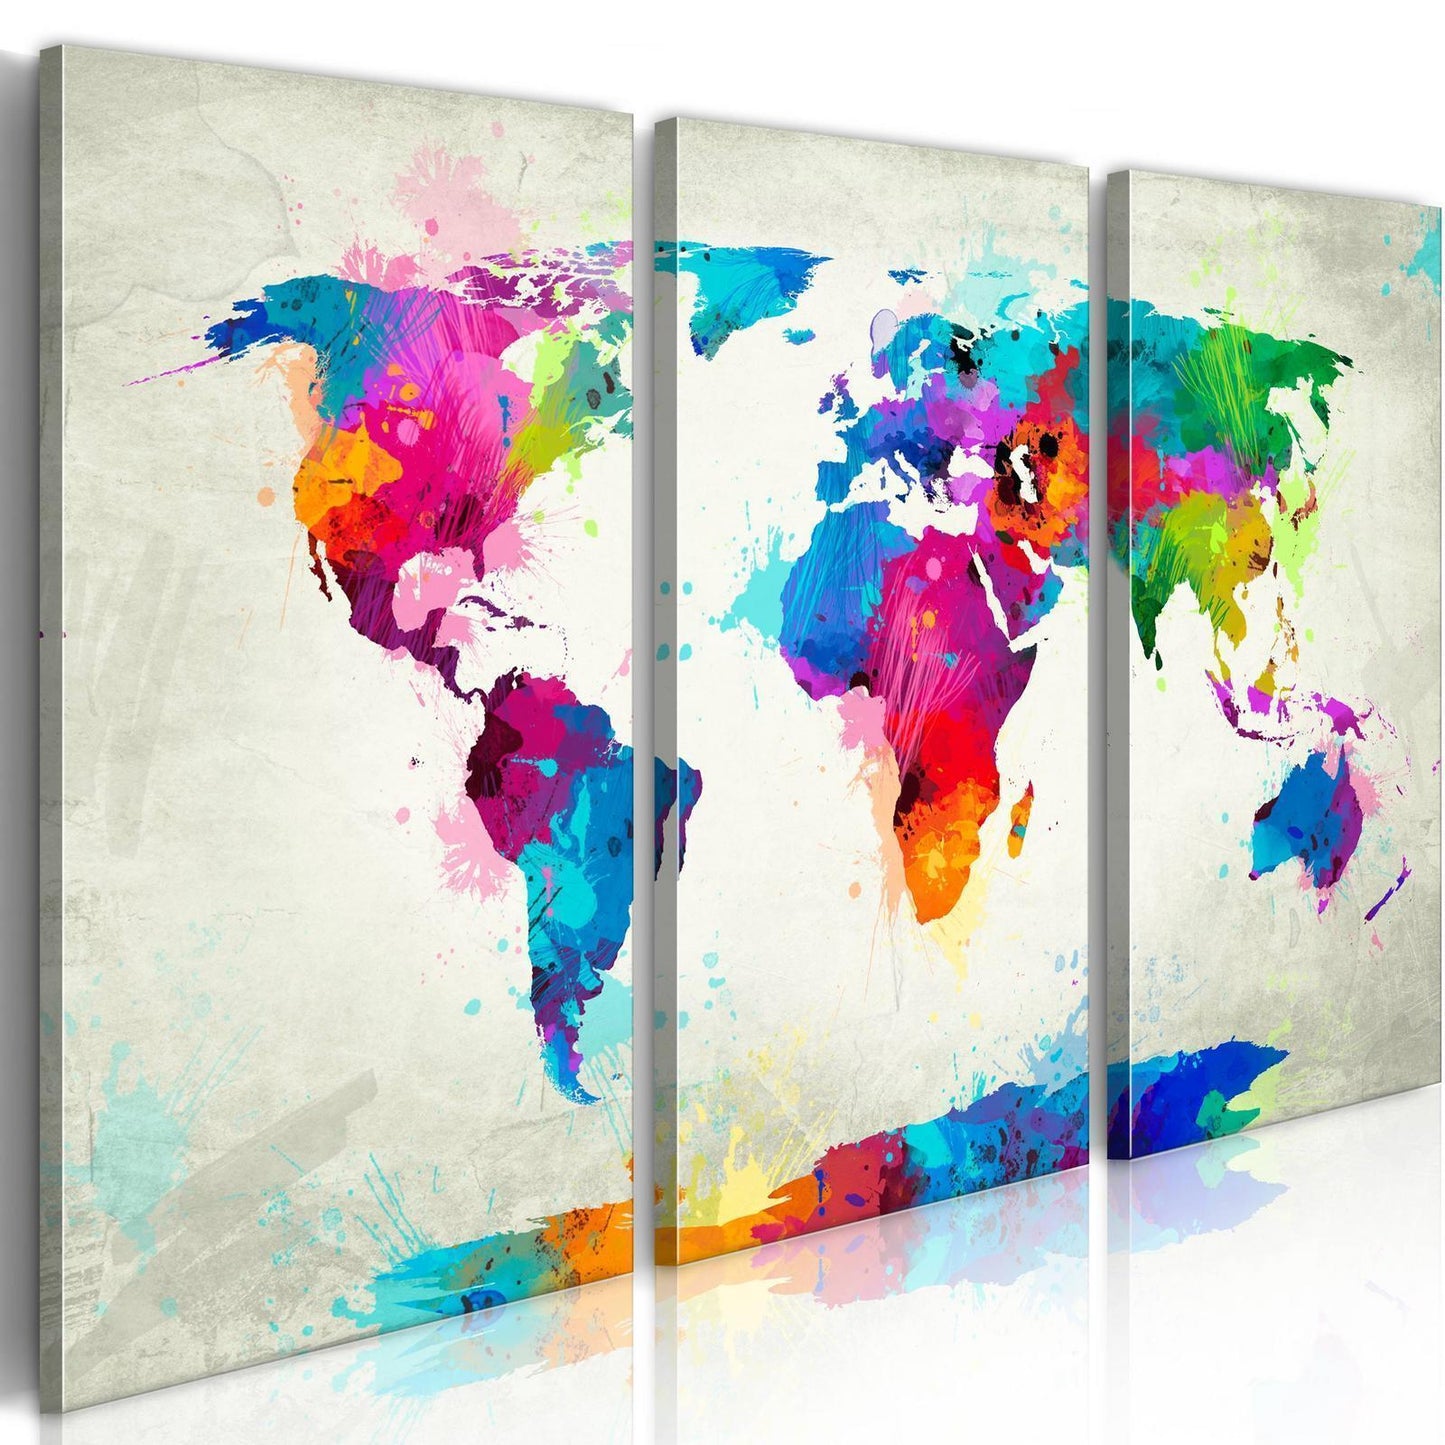 Image on acrylic glass - World Map: An Explosion of Colors [Glass]